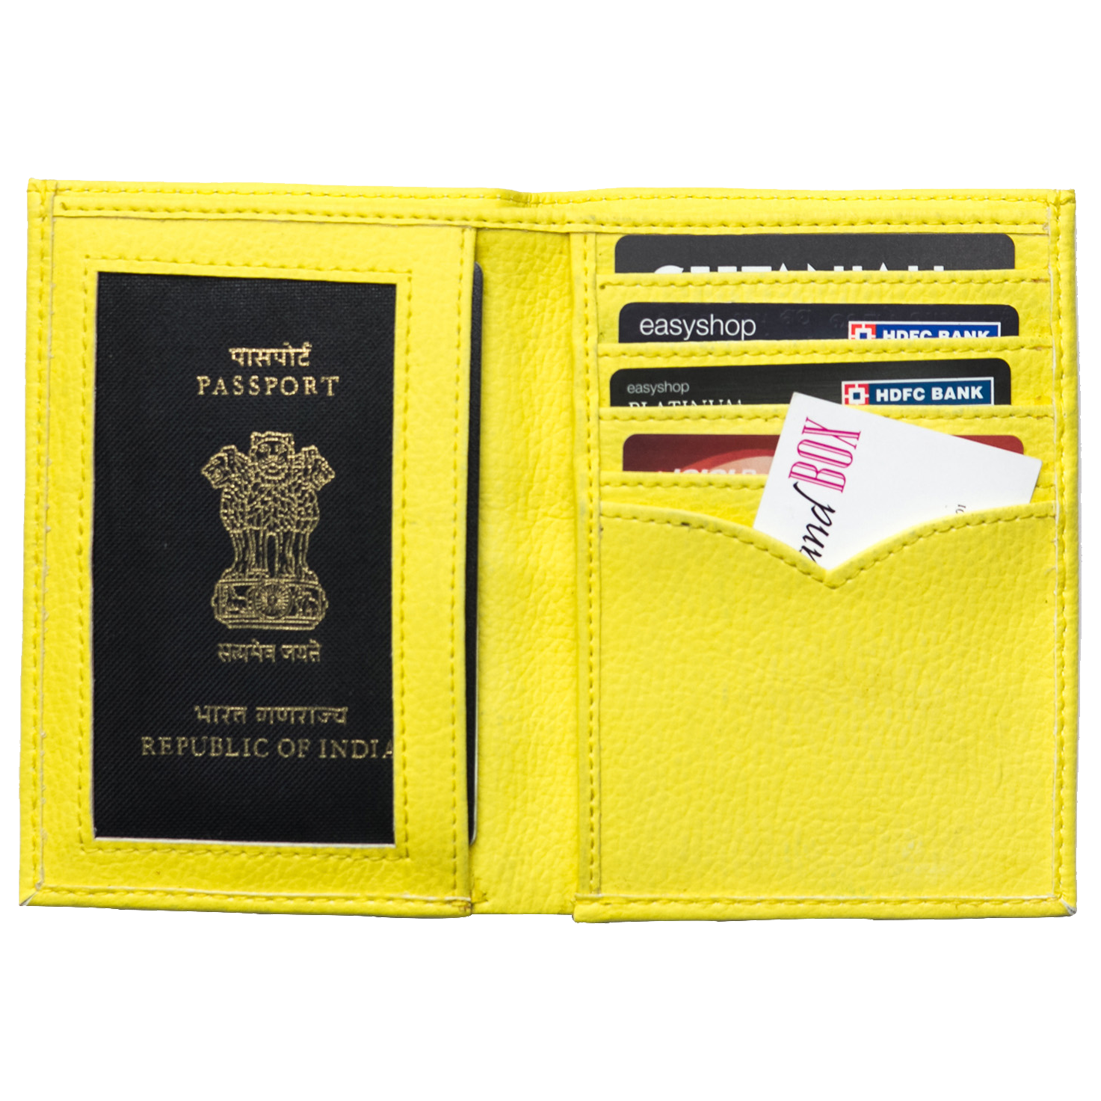 The Place Wallet & Passport Cover